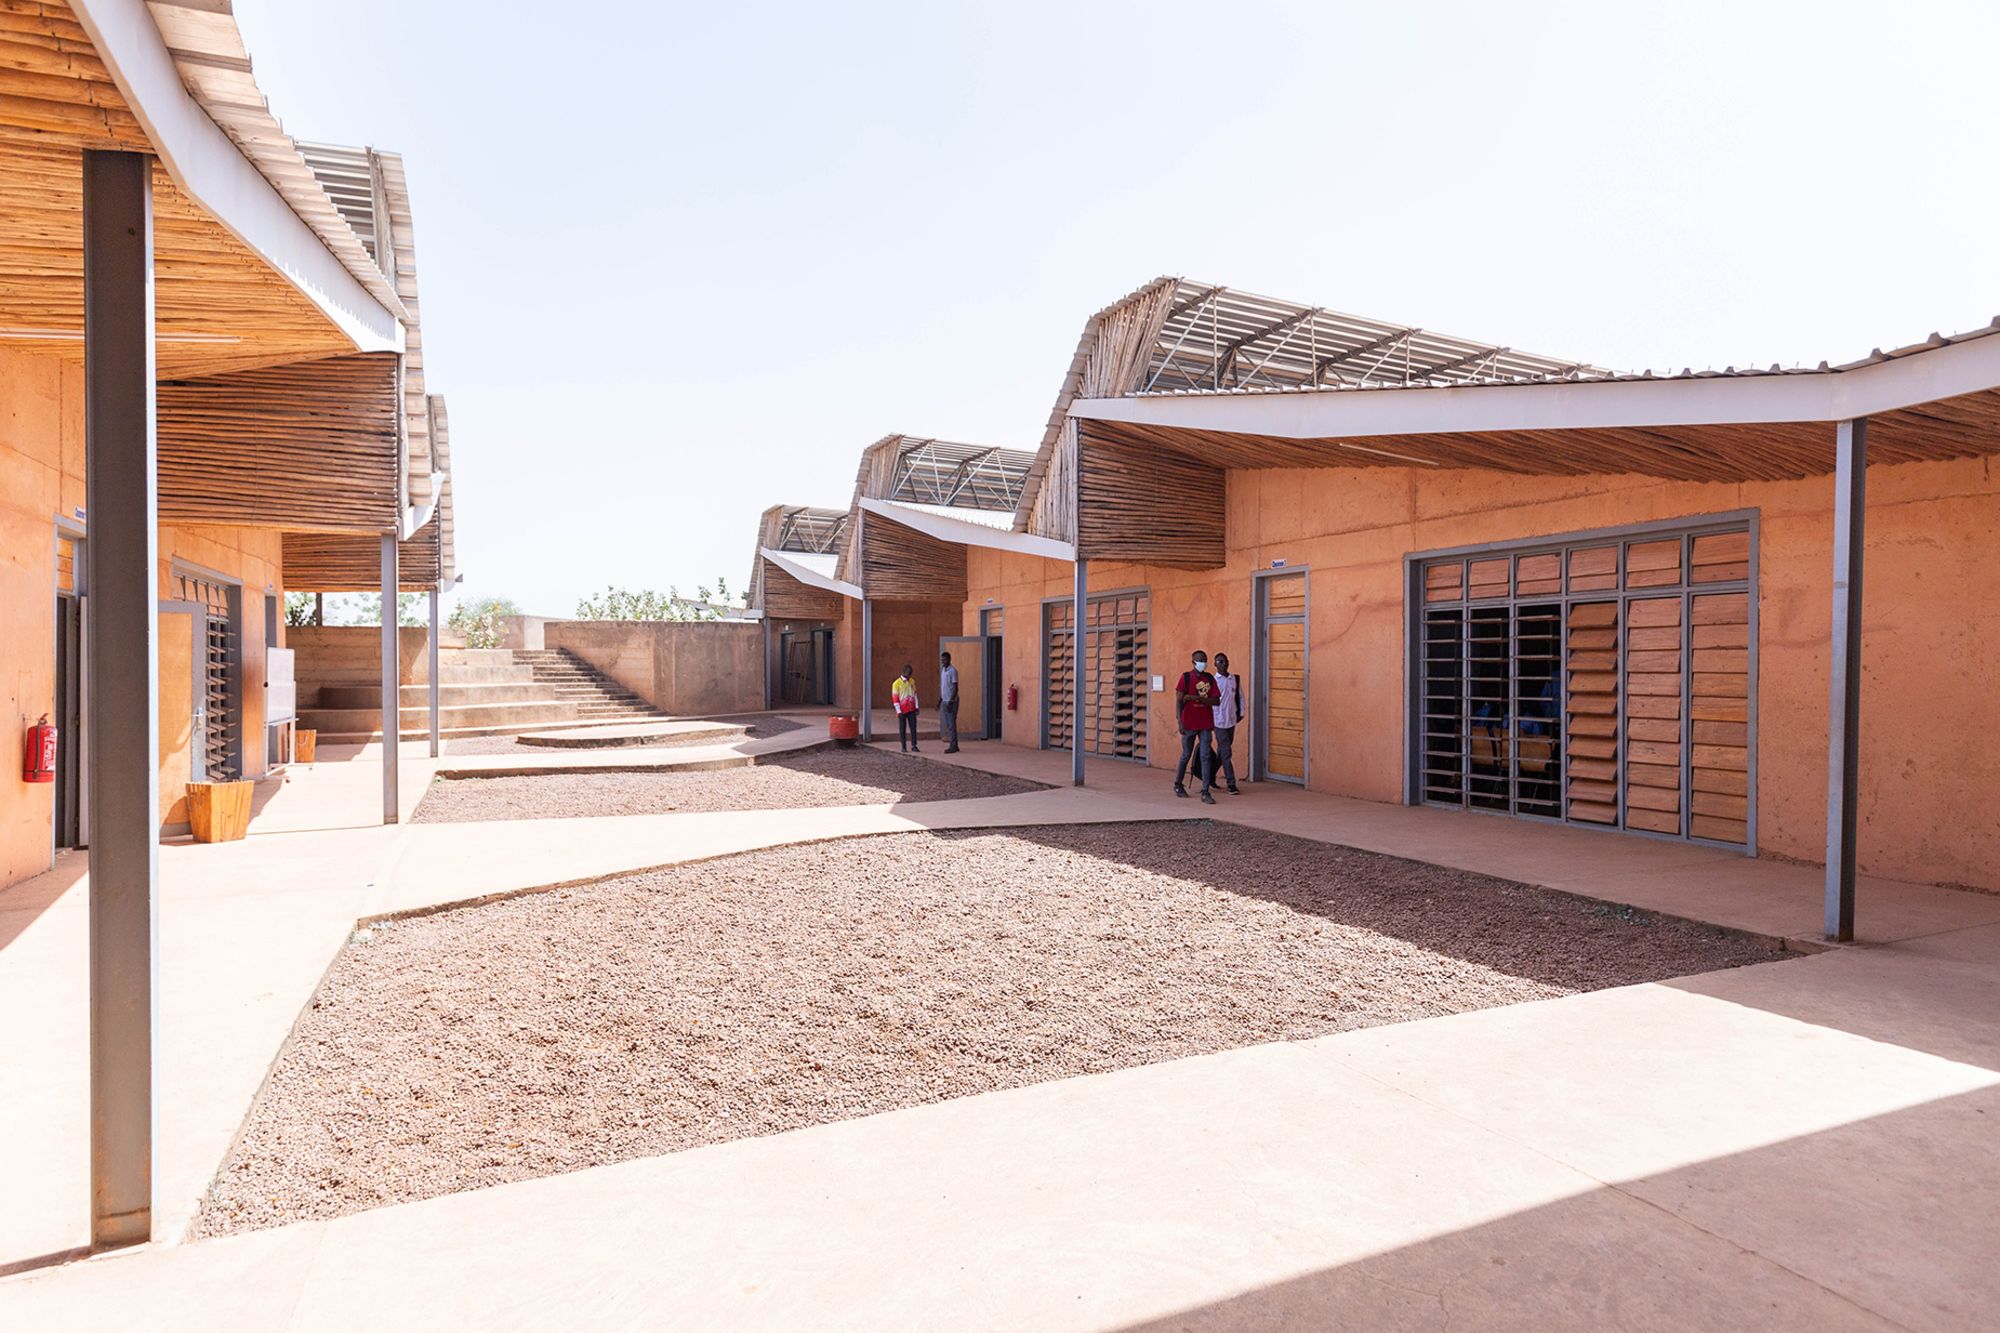 Architect Francis Kéré's design for the Burkina Institute of Technology in Burkina Faso.